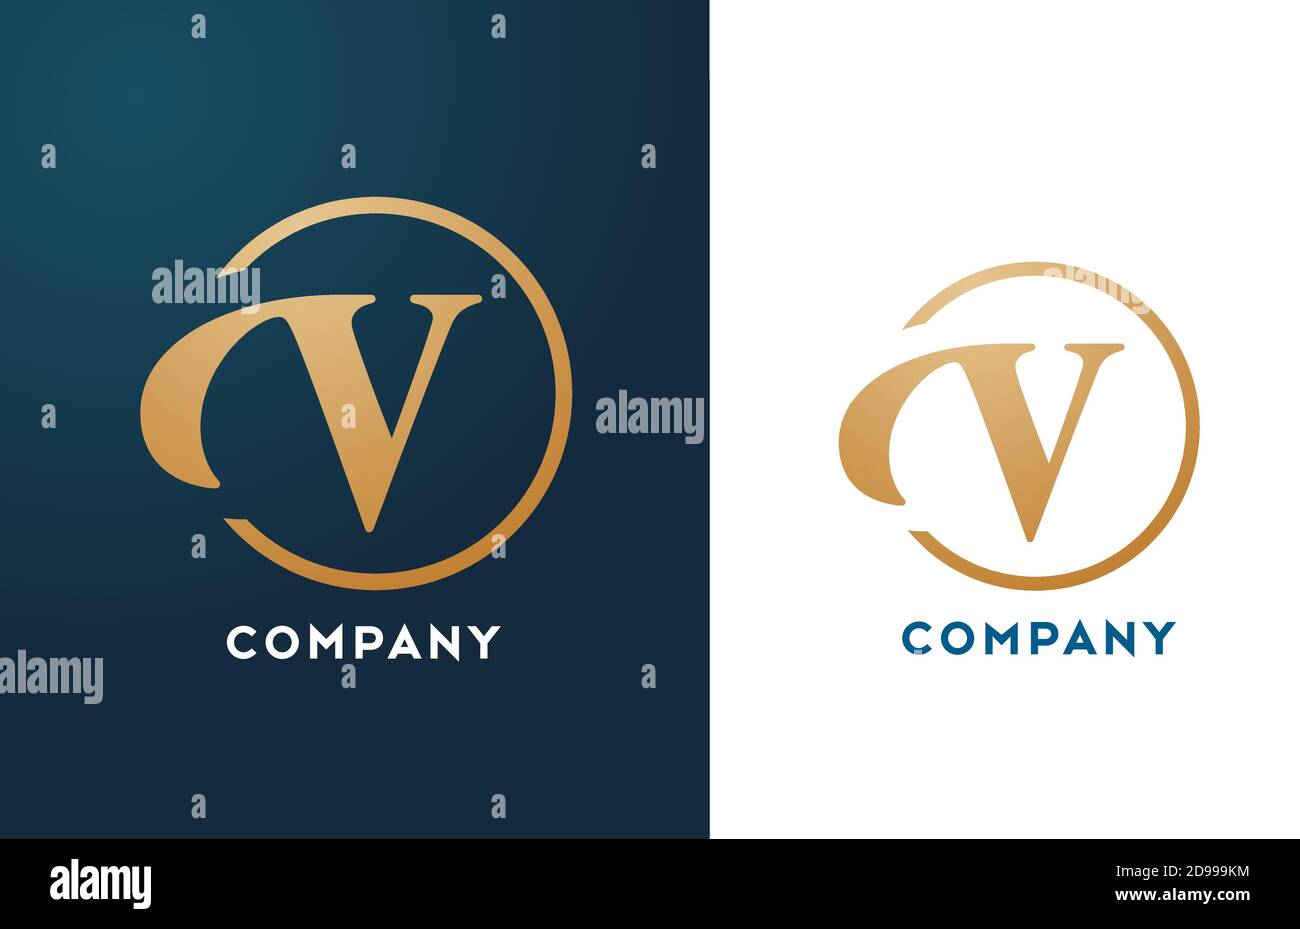 V Alphabet Letter Logo Icon In Gold And Blue Color Simple And Creative Golden Circle Design For Business And Company Stock Vector Image Art Alamy